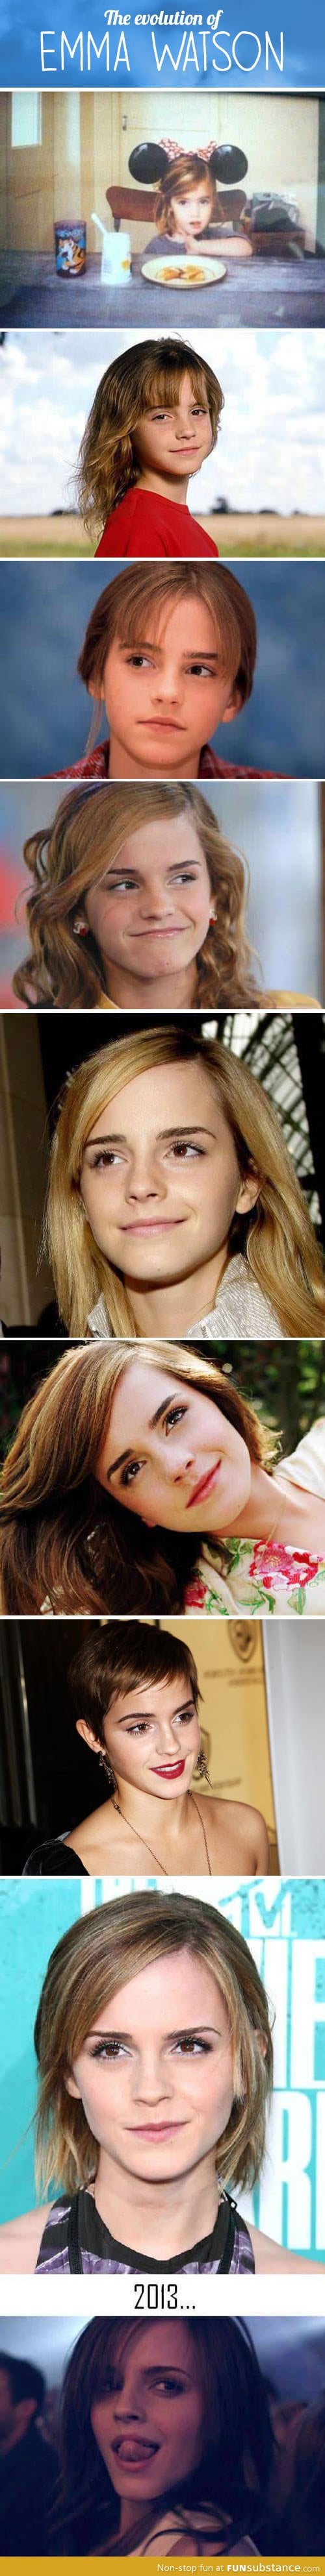 The evolution of Emma Watson over the years